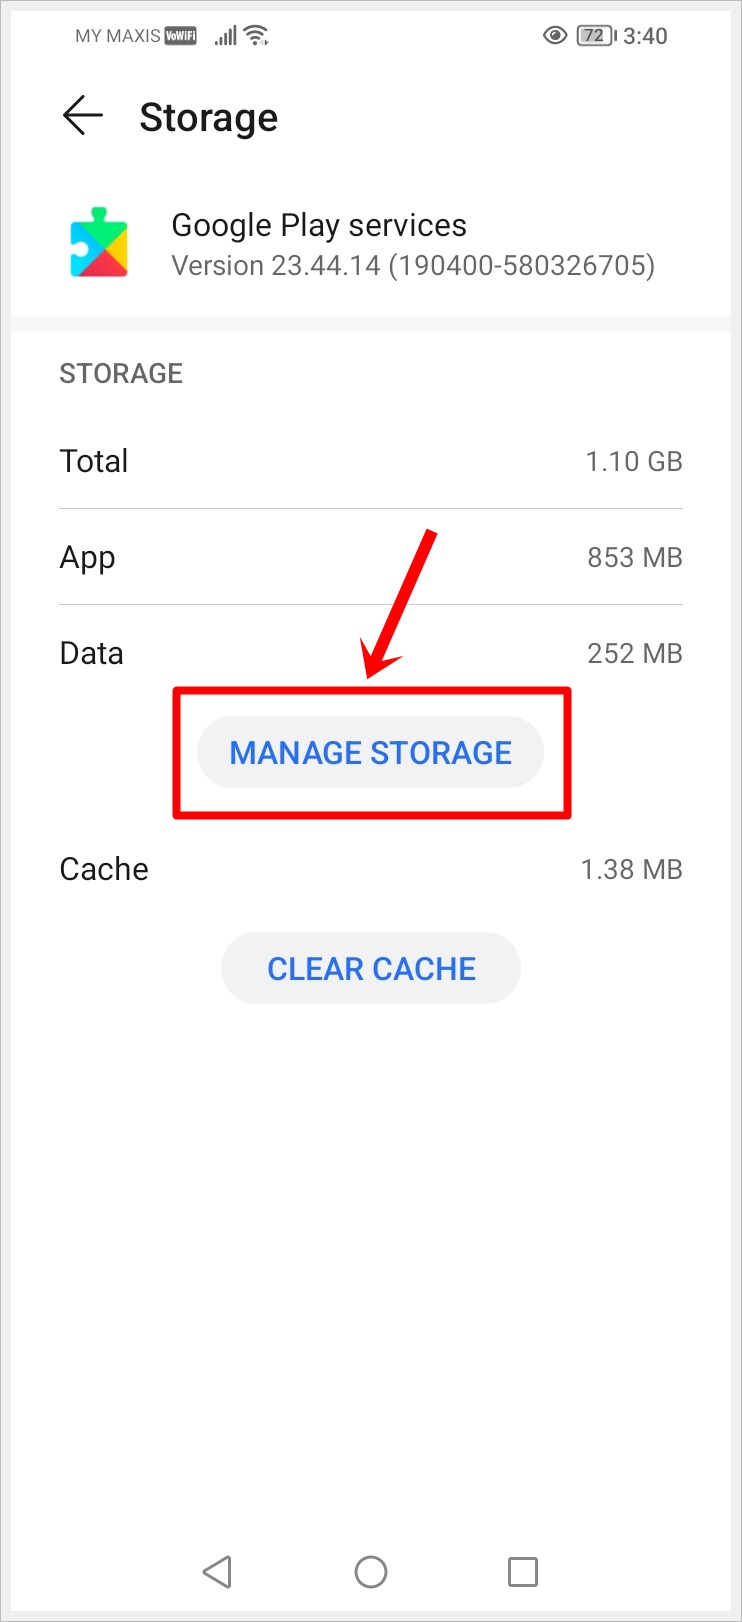 This image shows the Storage page of the 'Google play services' app. The 'MANAGE STORAGE' button is highlighted.